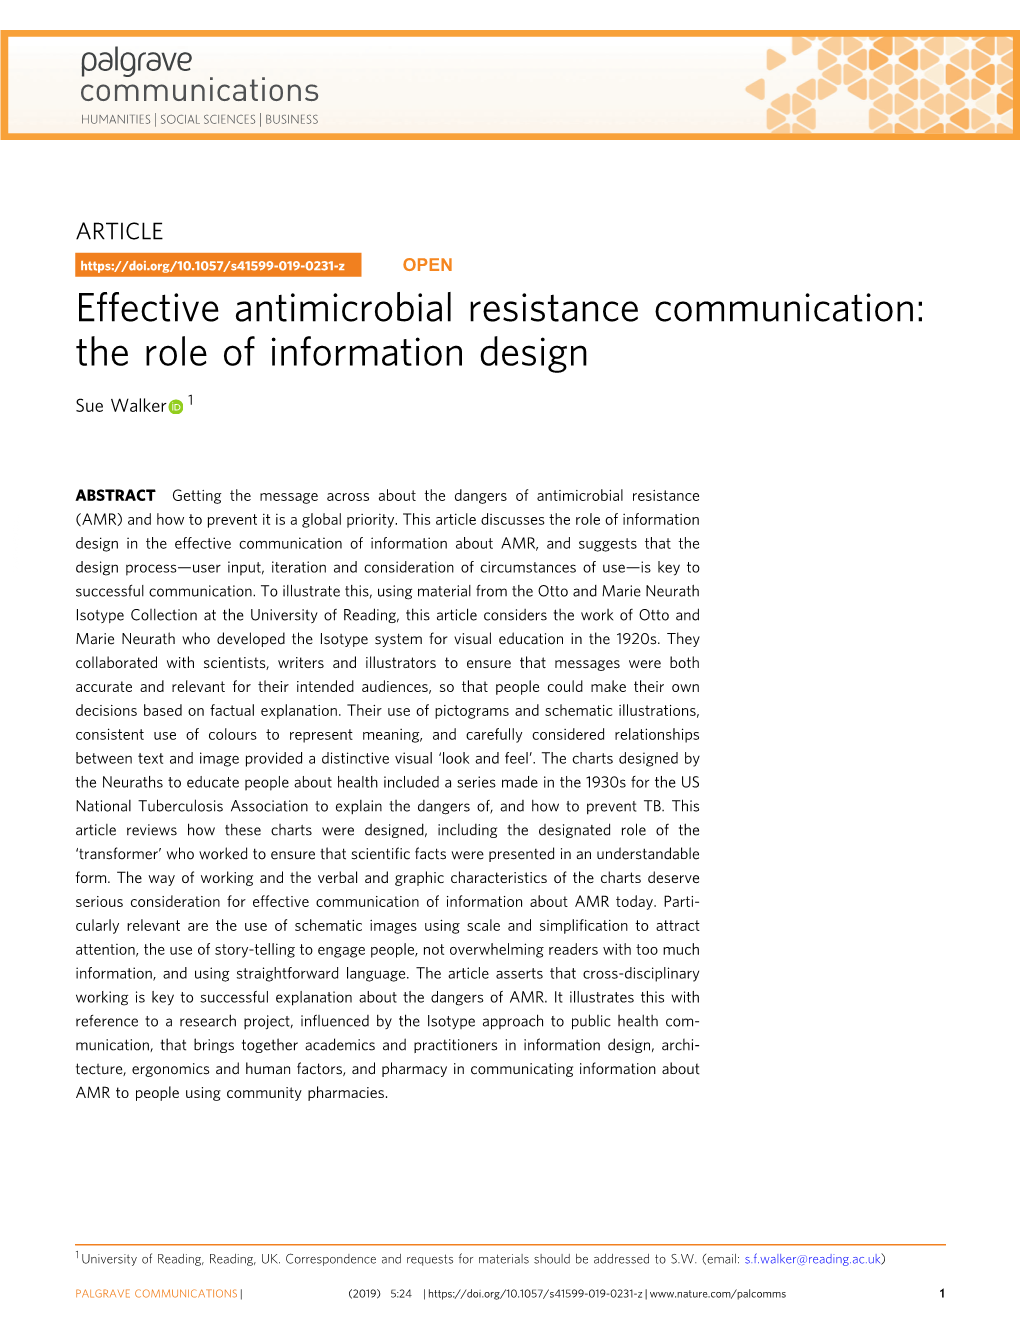 The Role of Information Design